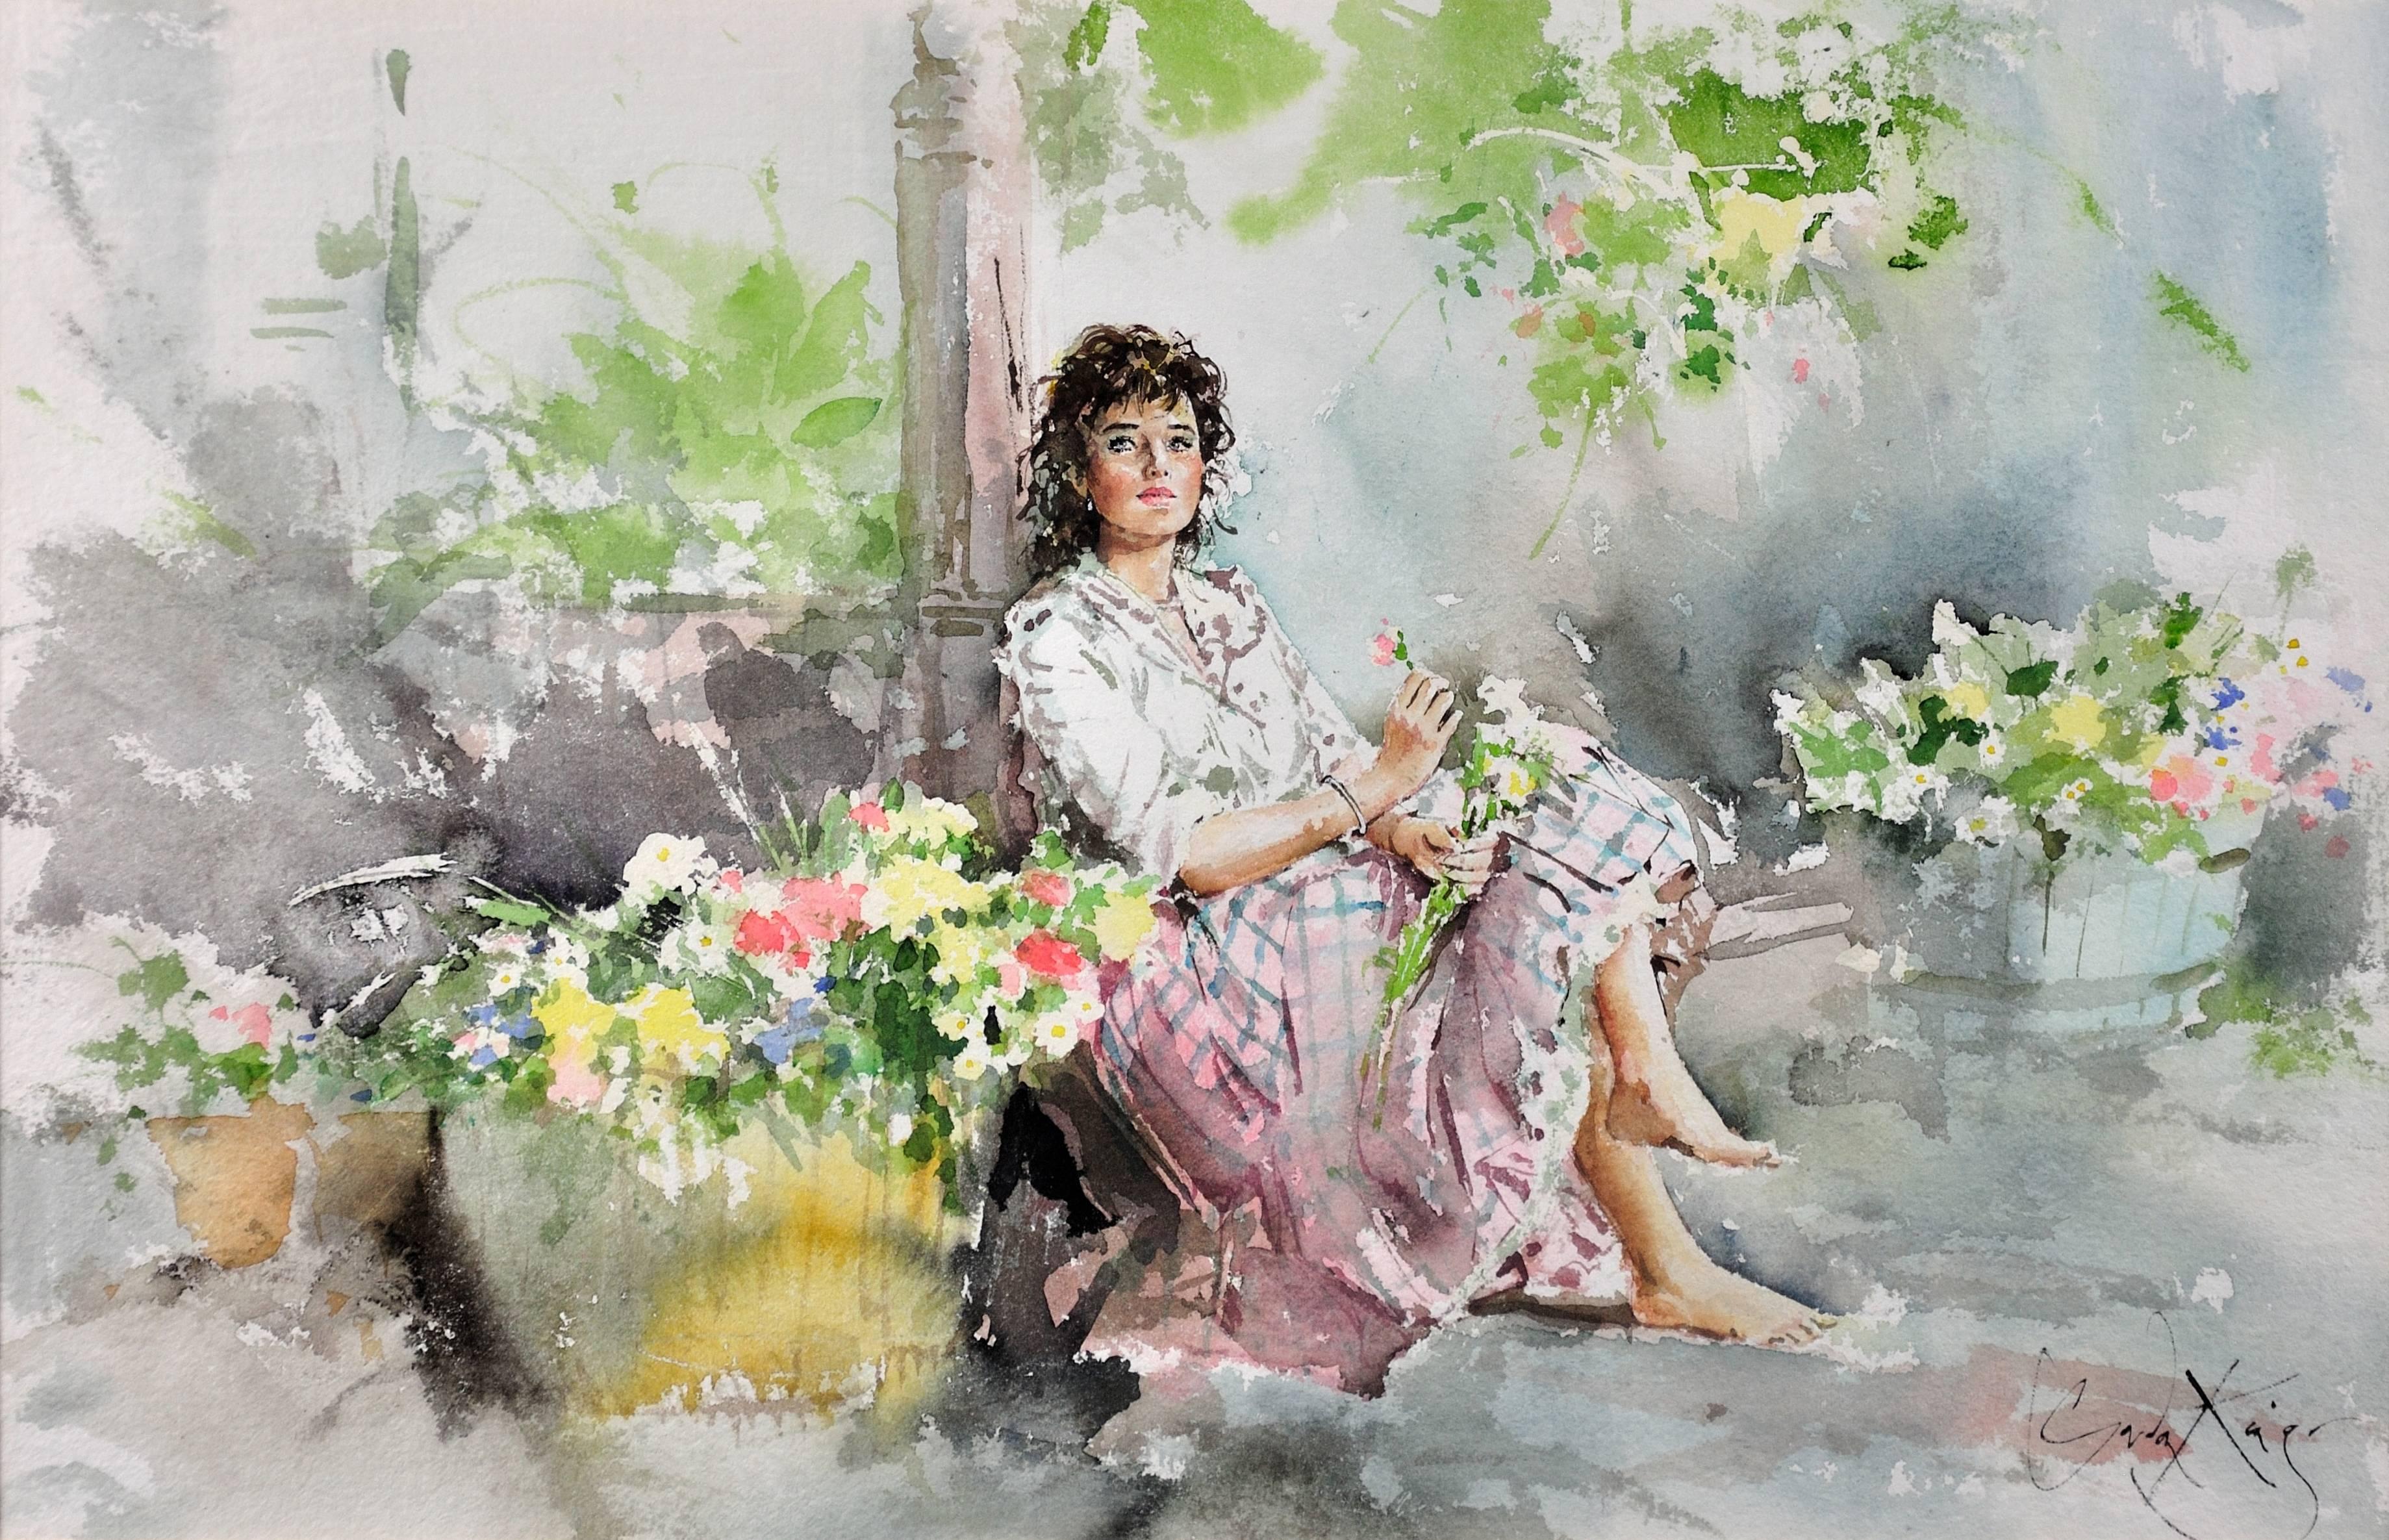 Gordon King. 
English ( b.1939 ).
Fond Memories.
Watercolor. Signed.
Image size 13.6 inches x 21 inches ( 34.5cm x 53.5cm ).
Frame size 22.4 inches x 29.9 inches ( 57cm x 76cm ).

Available for sale is this original painting by Gordon King. It is